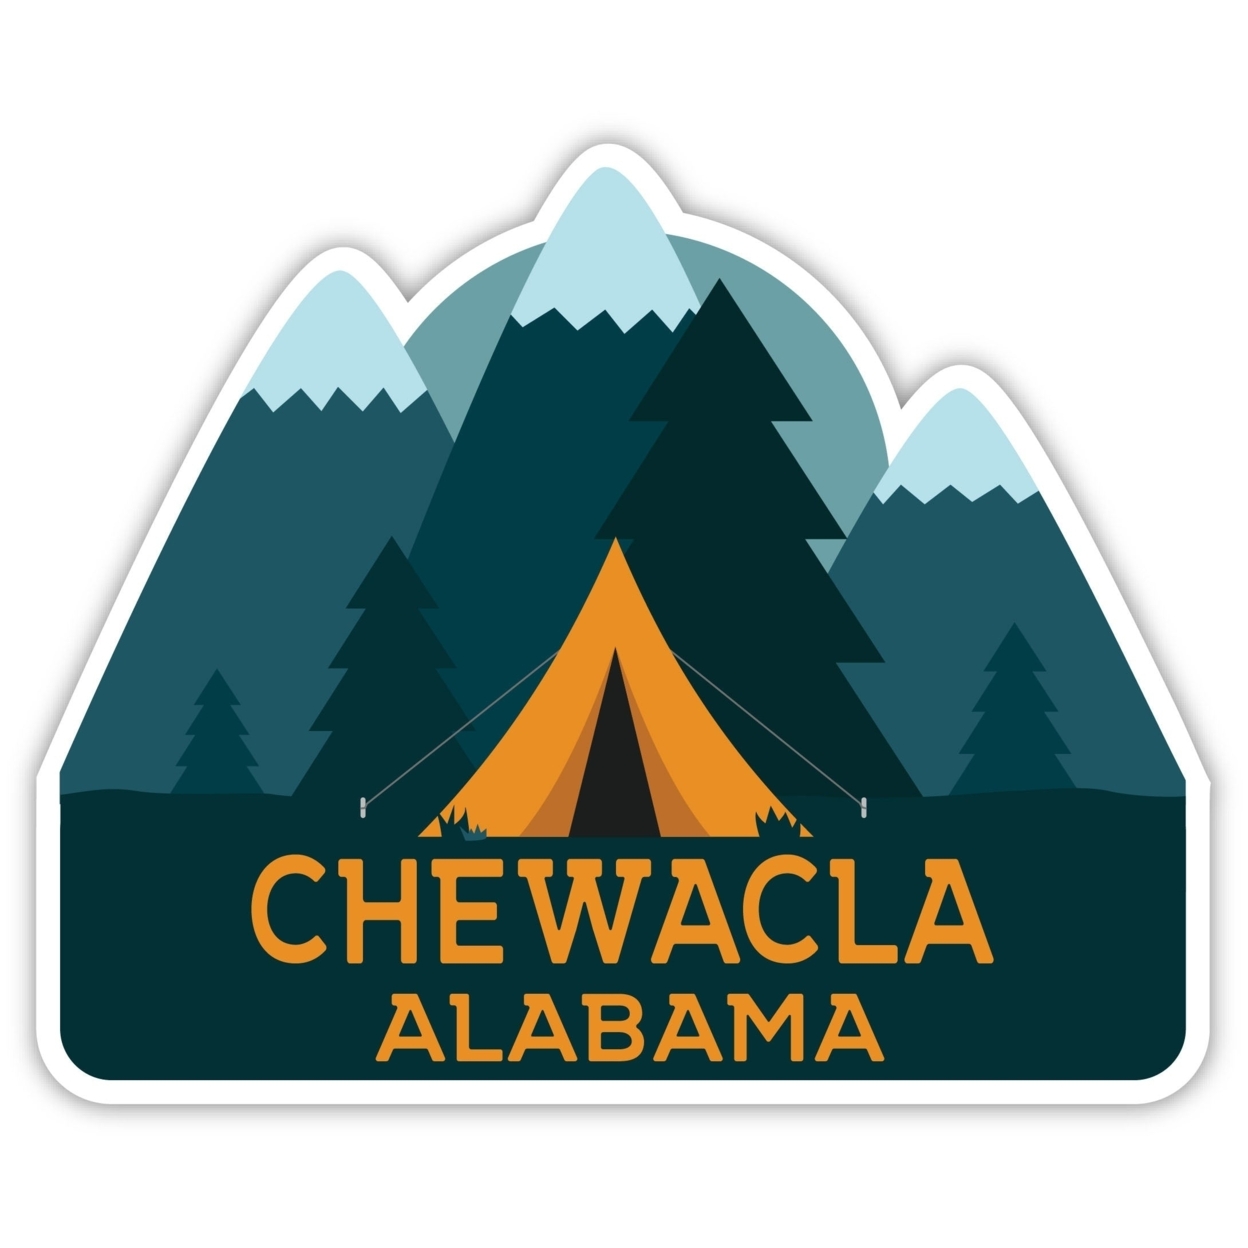 Chewacla Alabama Souvenir Decorative Stickers (Choose Theme And Size) - 4-Pack, 4-Inch, Tent